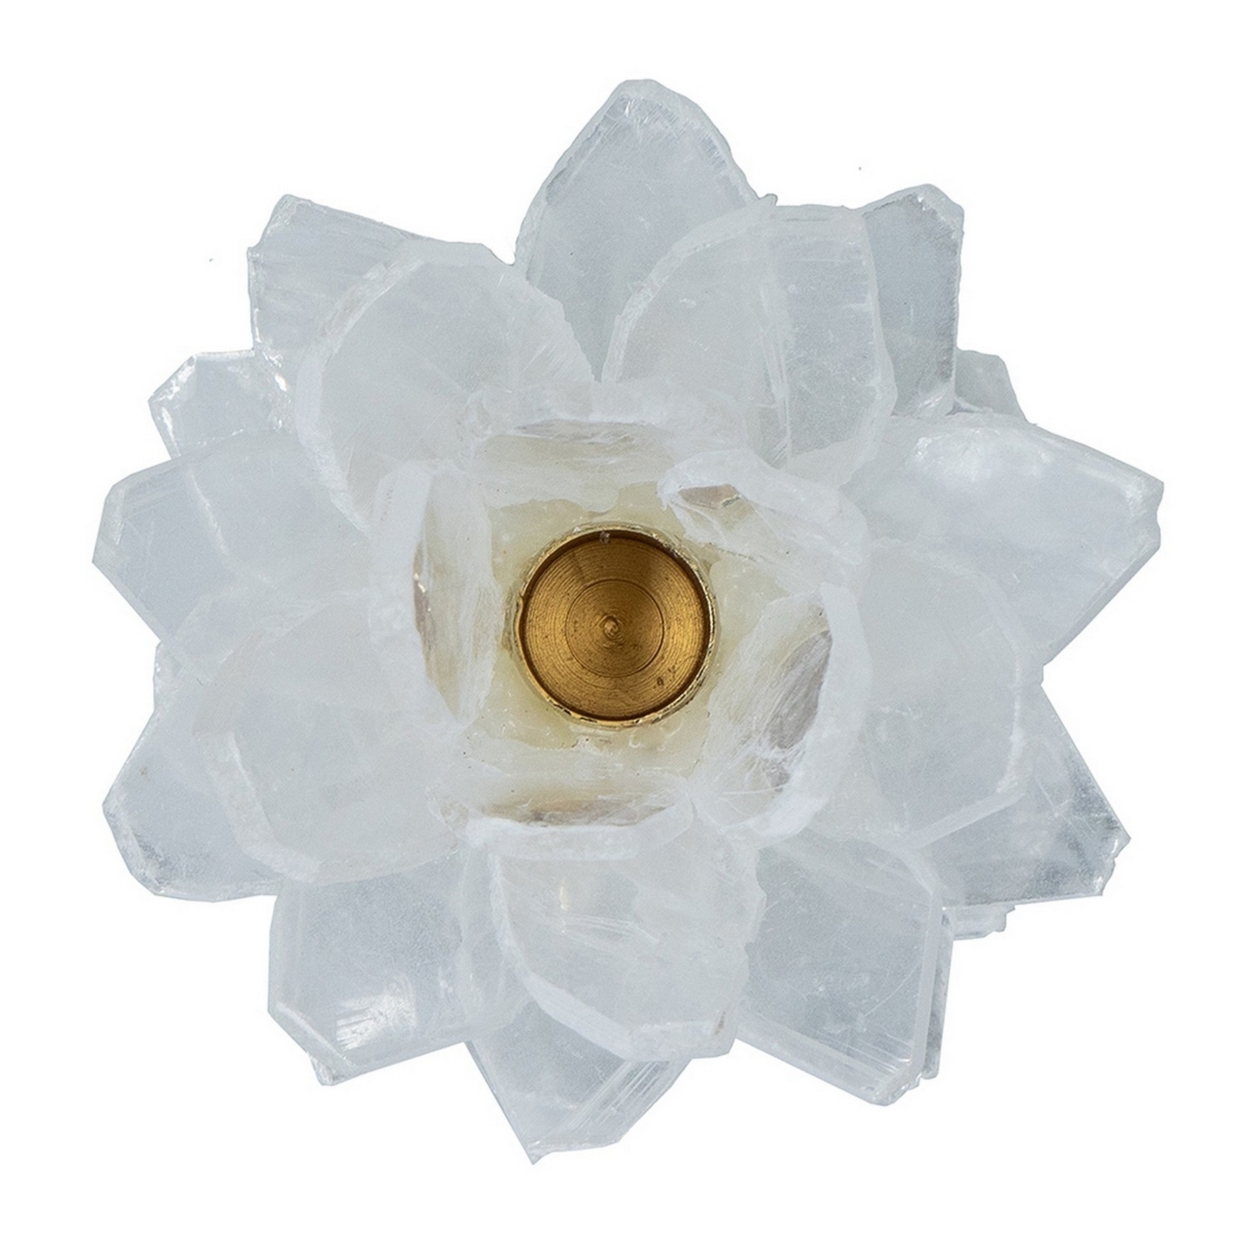 Sel 6 Inch Candle Holder, Selenite Stone Flower Accent, Gold, Clear Blue- Saltoro Sherpi